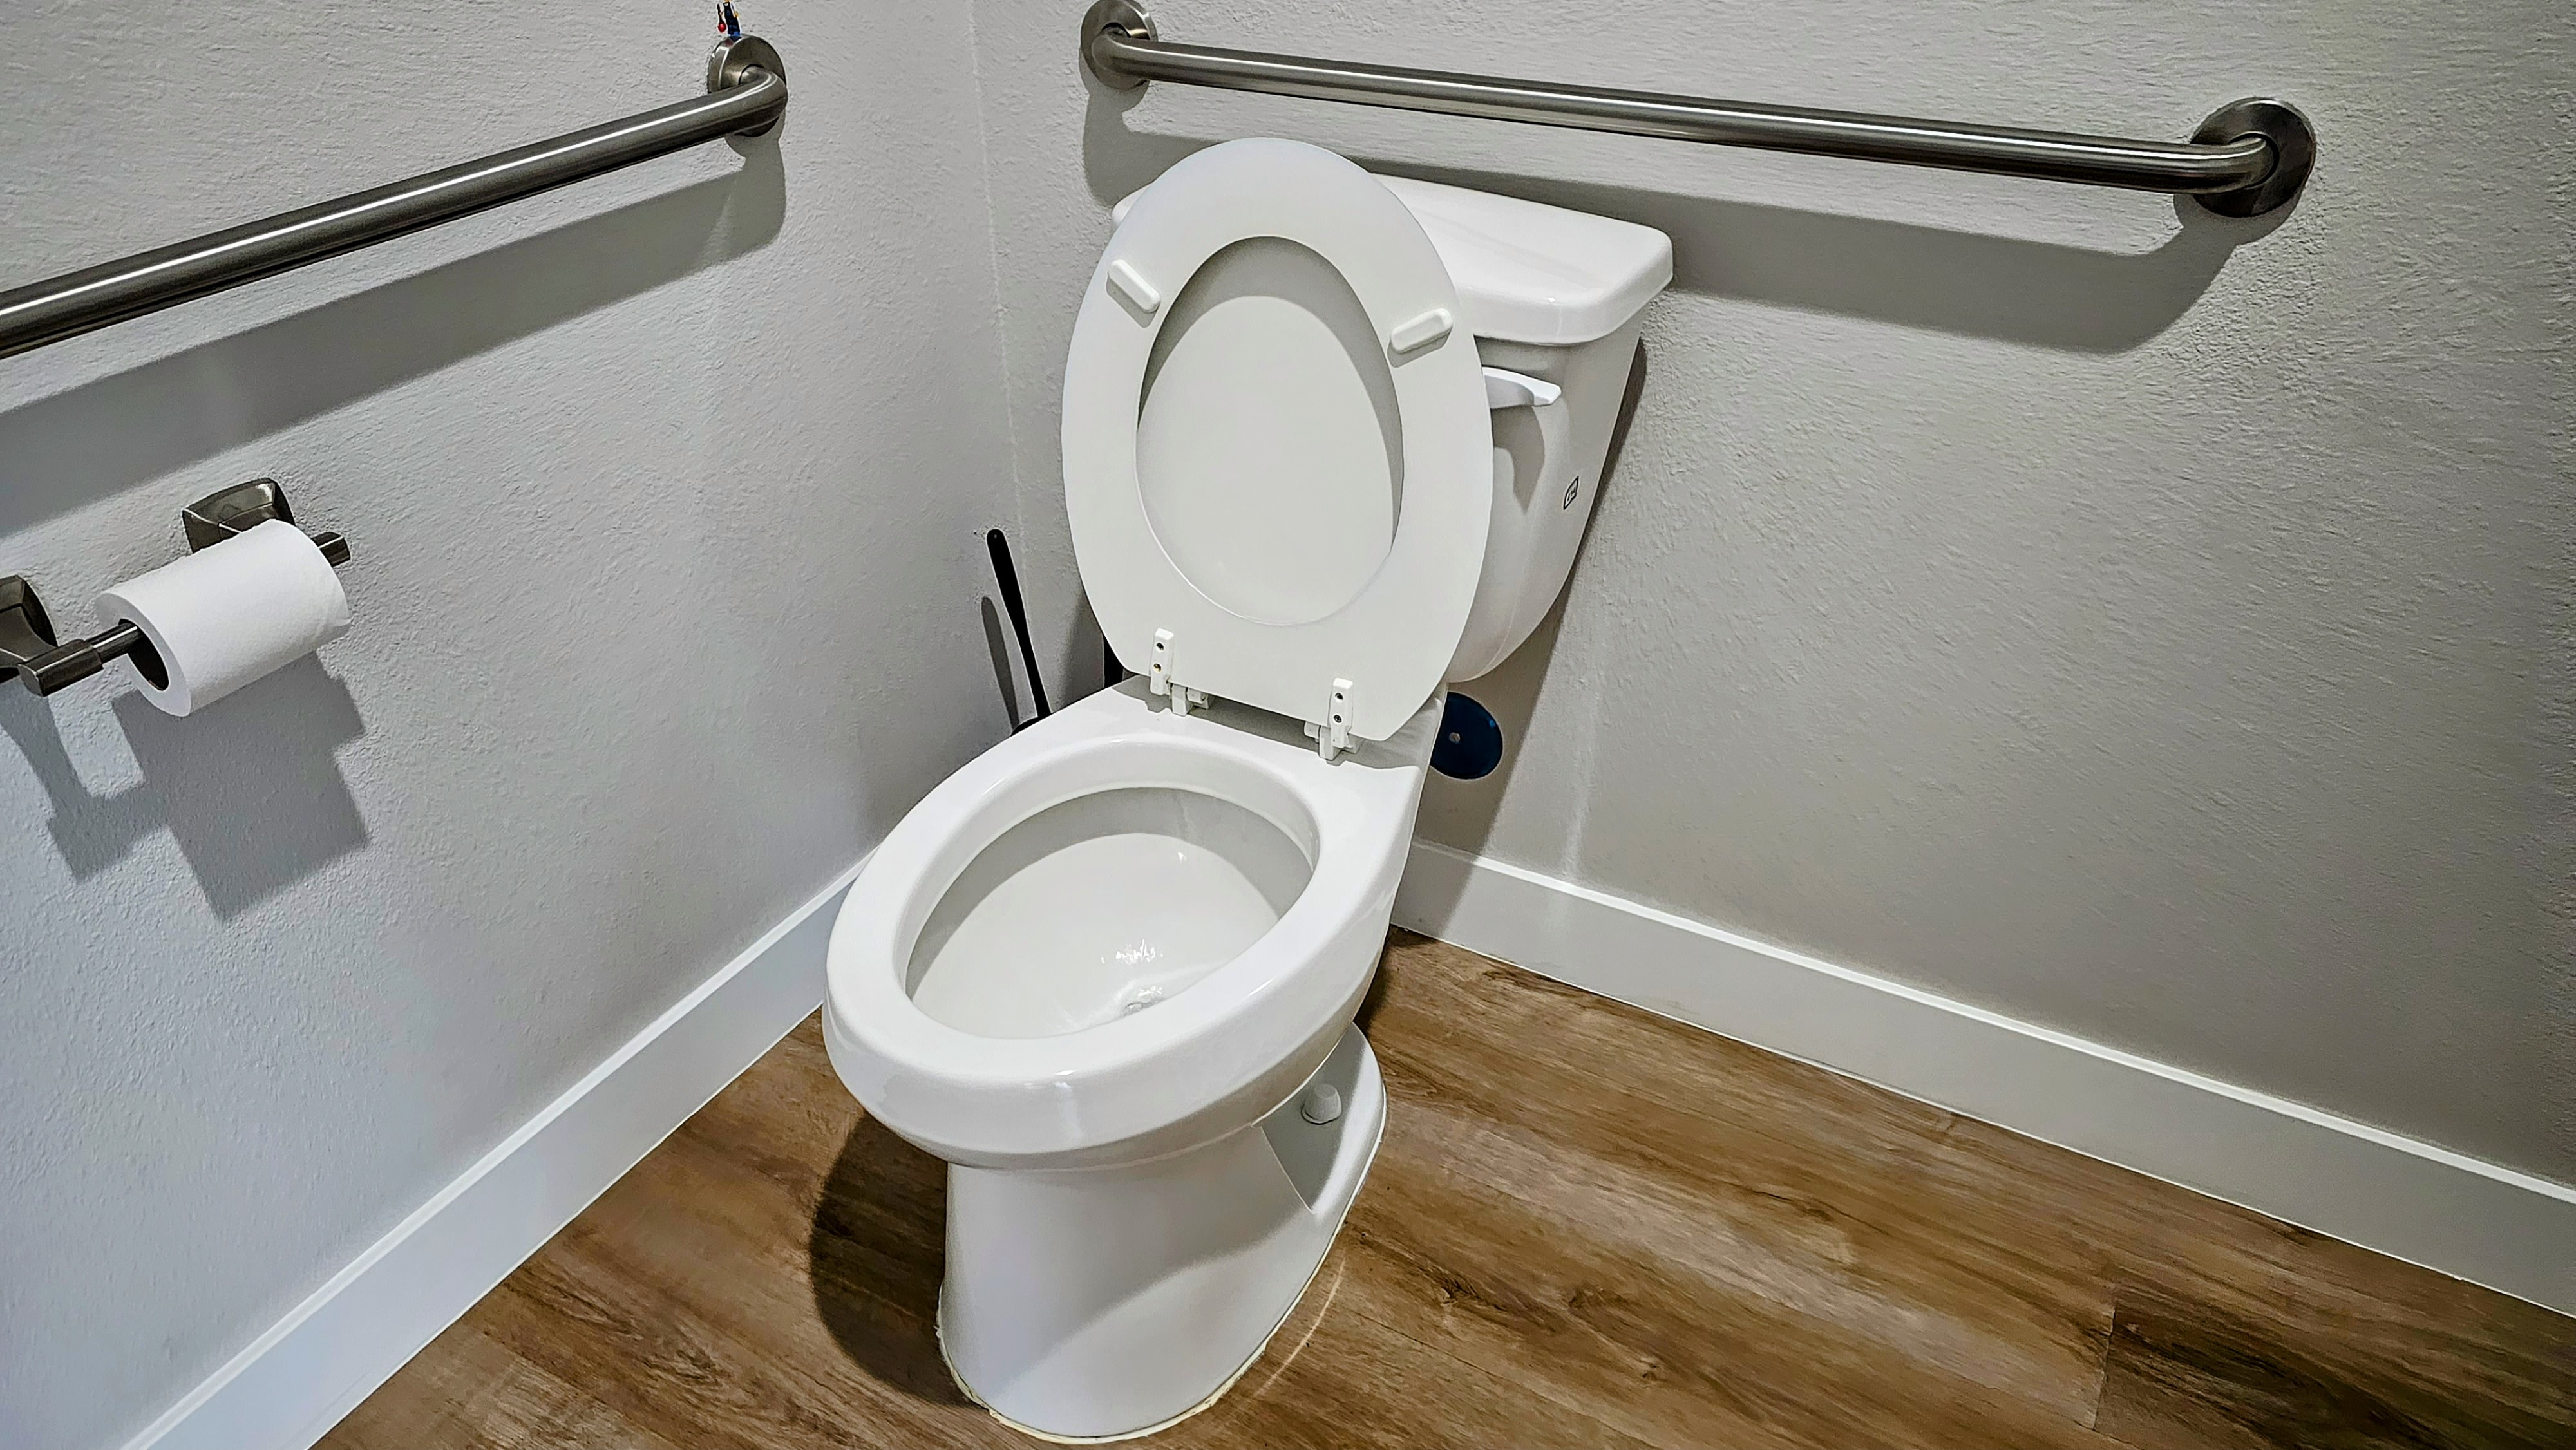 Stopping A Running Toilet: A Guide For DIY Fixes and When to Call the Pros